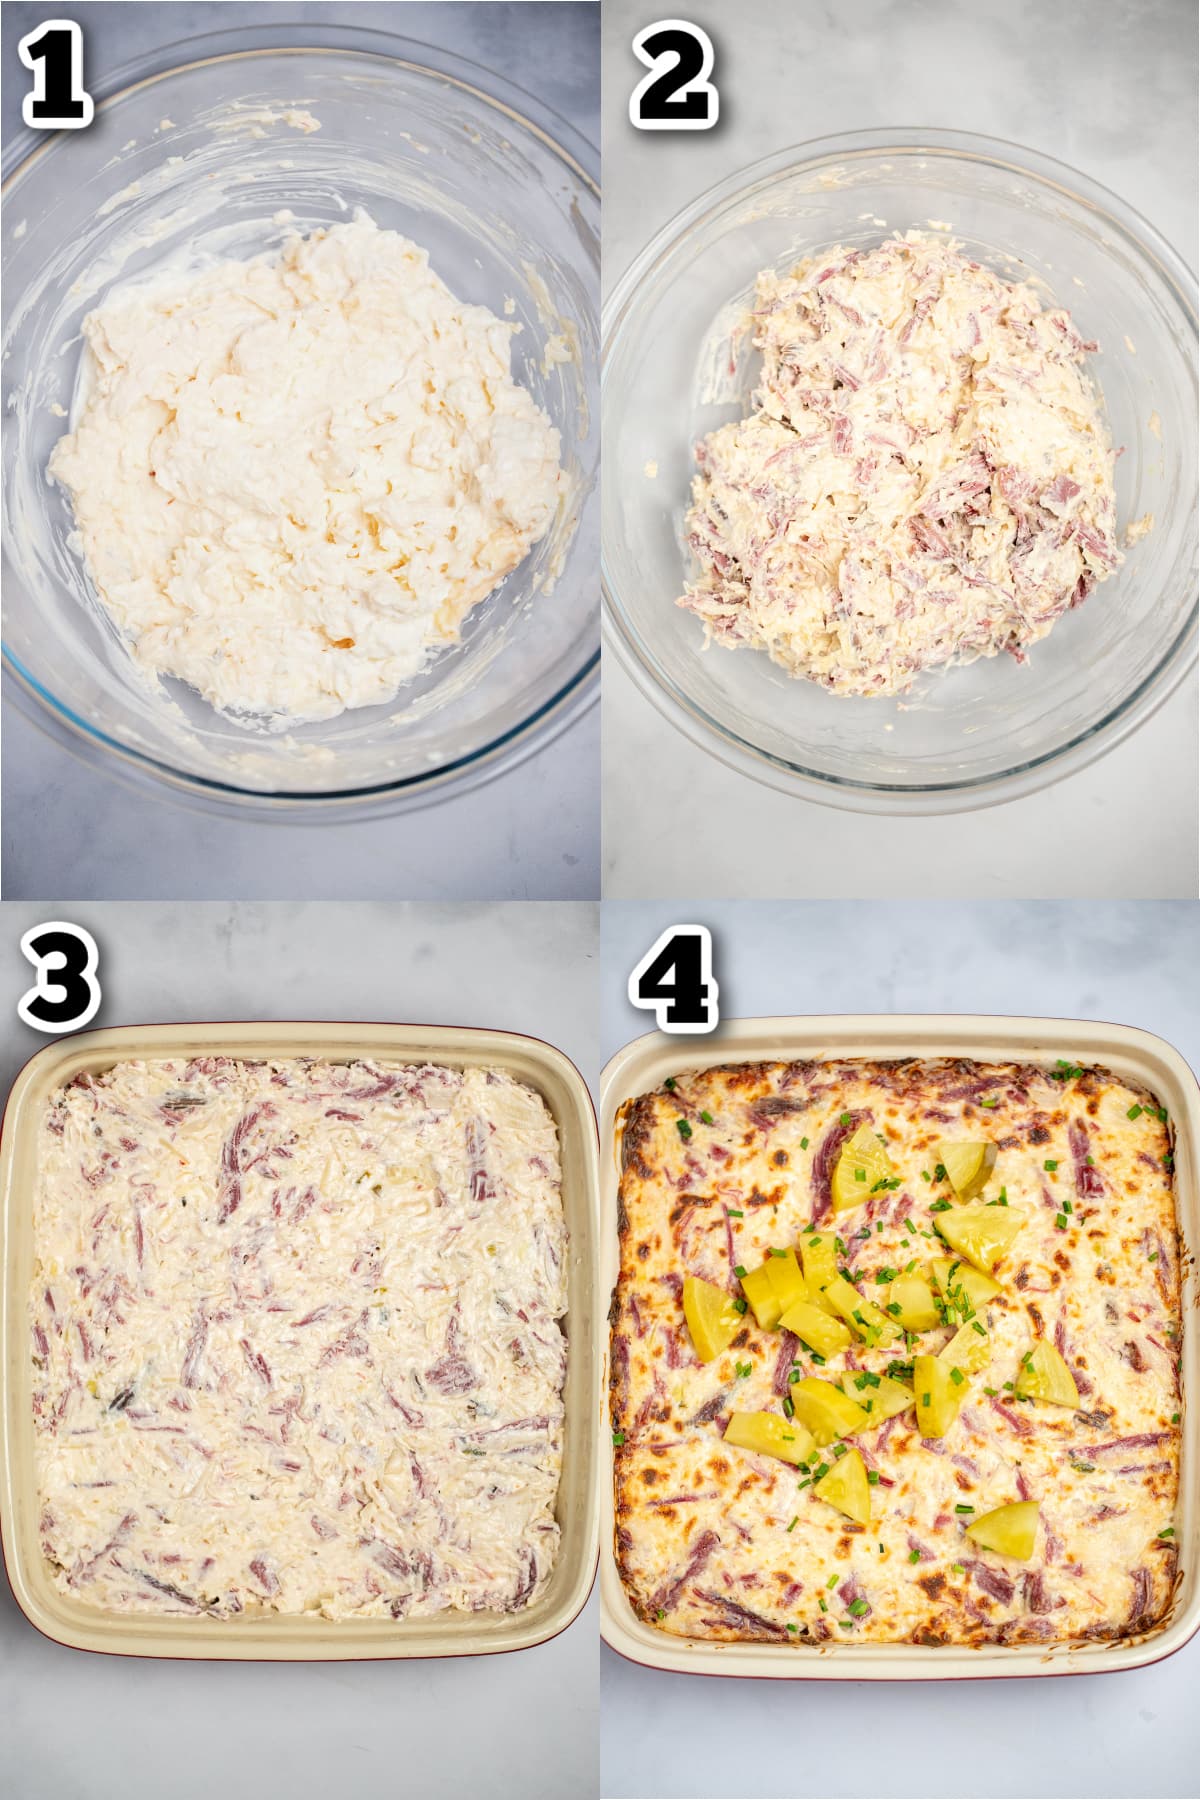 Step by step photos for how to make hot reuben dip.